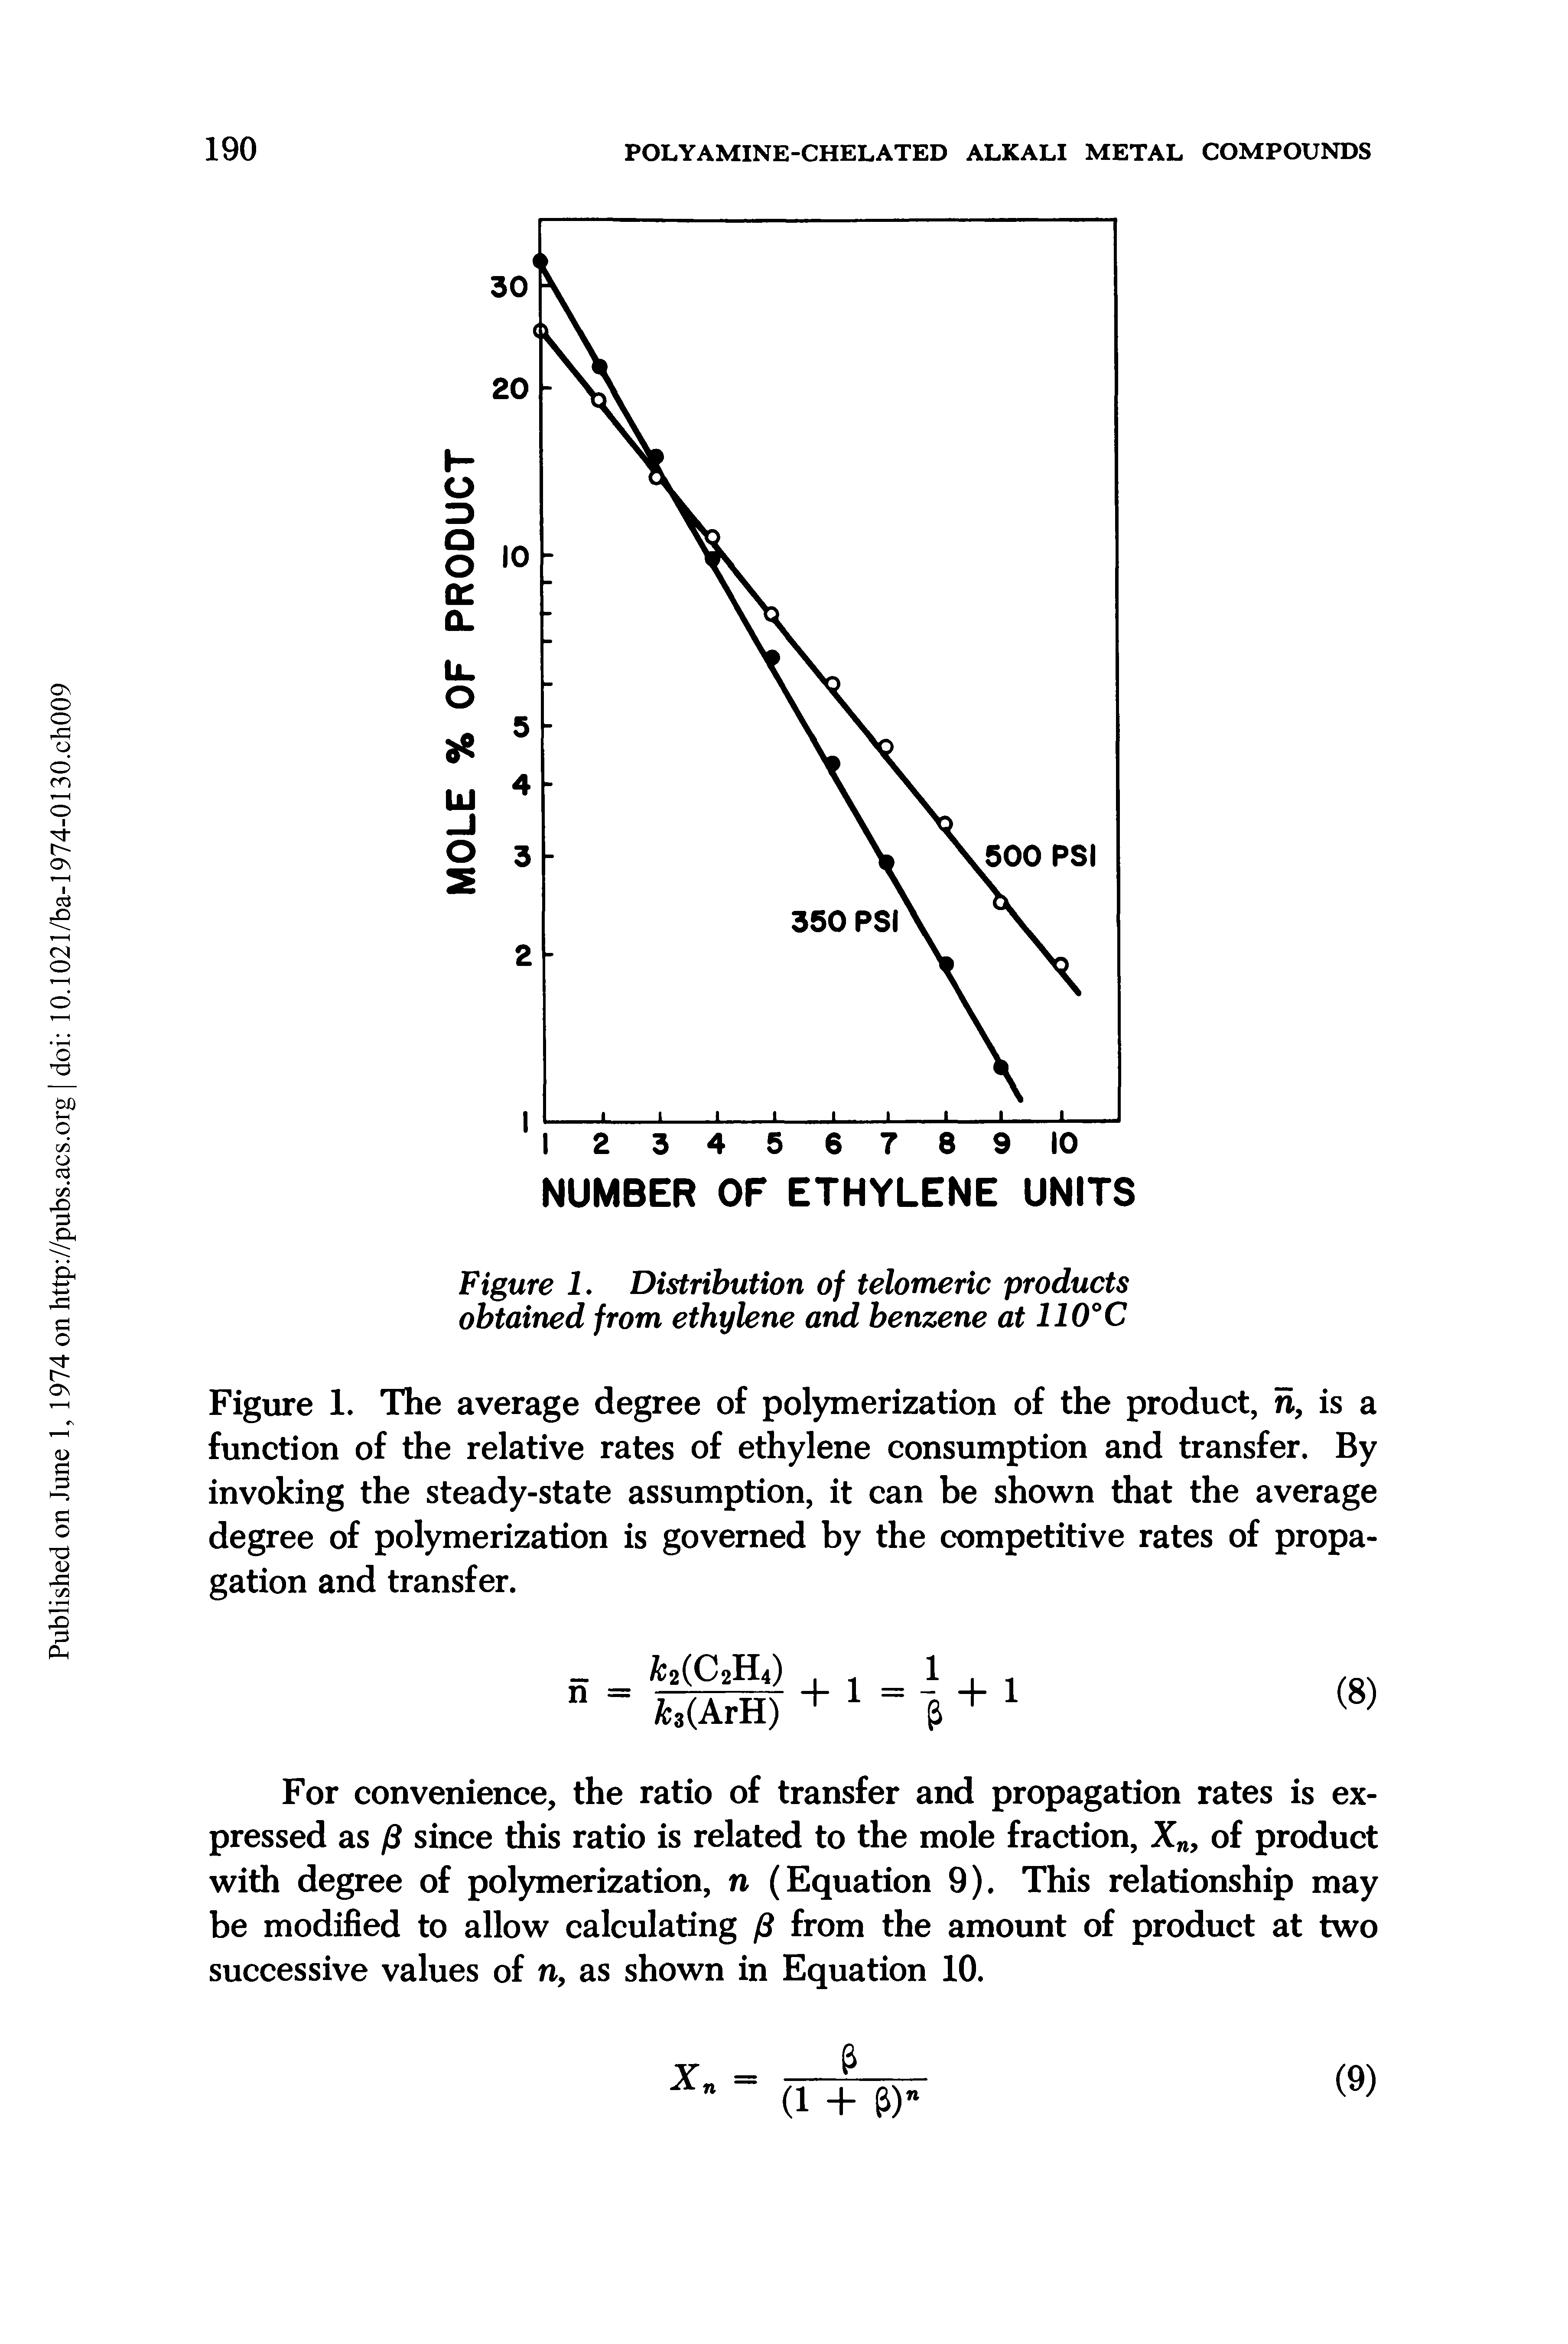 Figure 1. The average degree of polymerization of the product, n, is a function of the relative rates of ethylene consumption and transfer. By invoking the steady-state assumption, it can be shown that the average degree of polymerization is governed by the competitive rates of propagation and transfer.